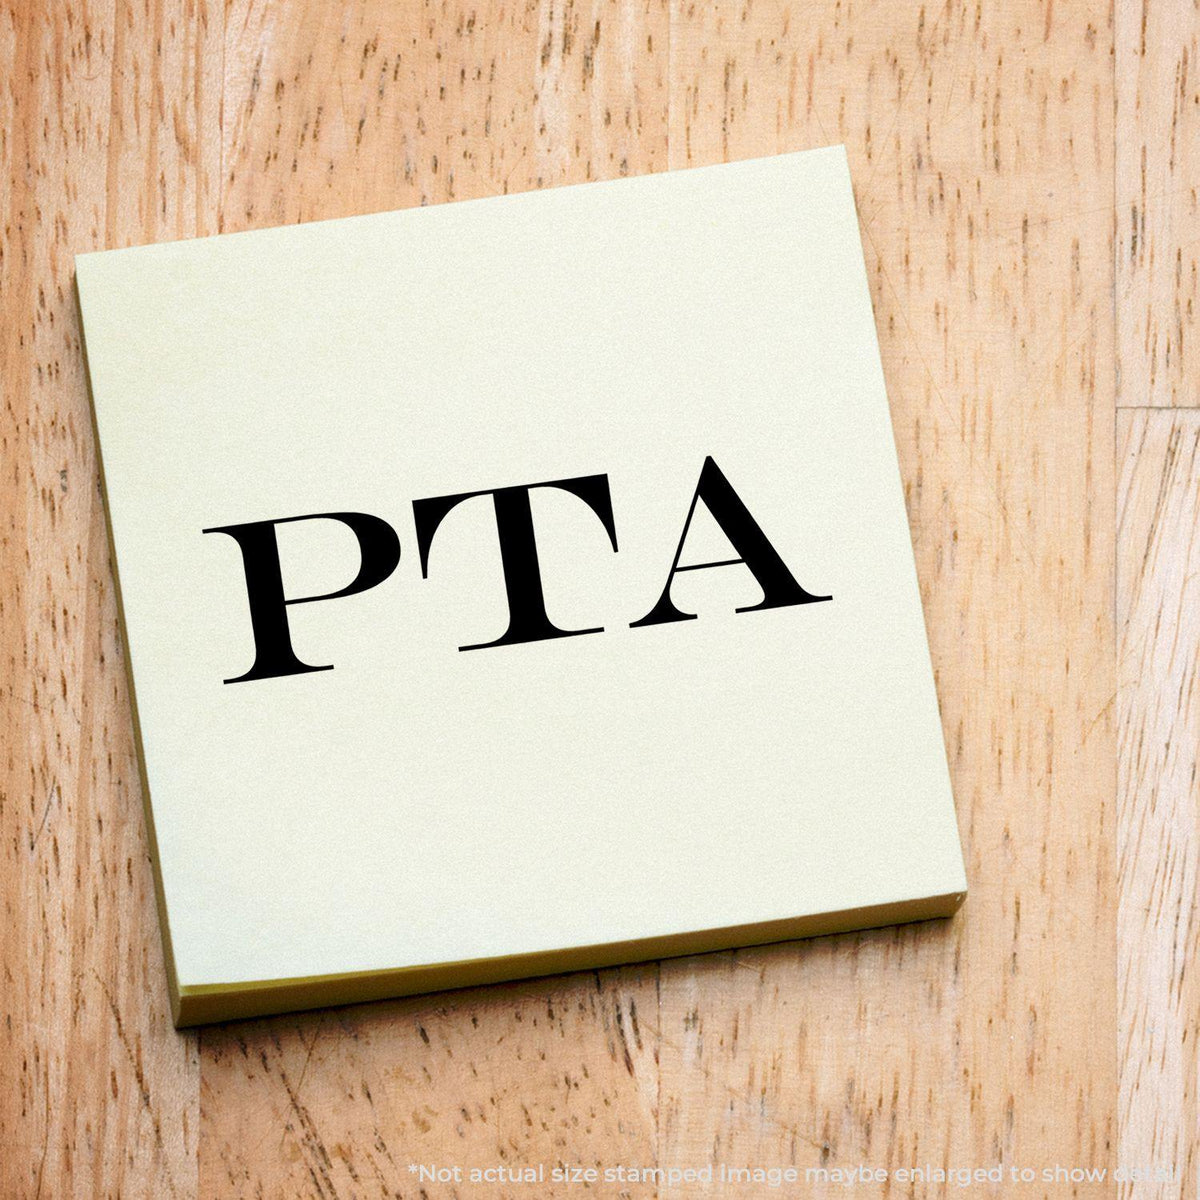 In Use Large PTA Rubber Stamp Image